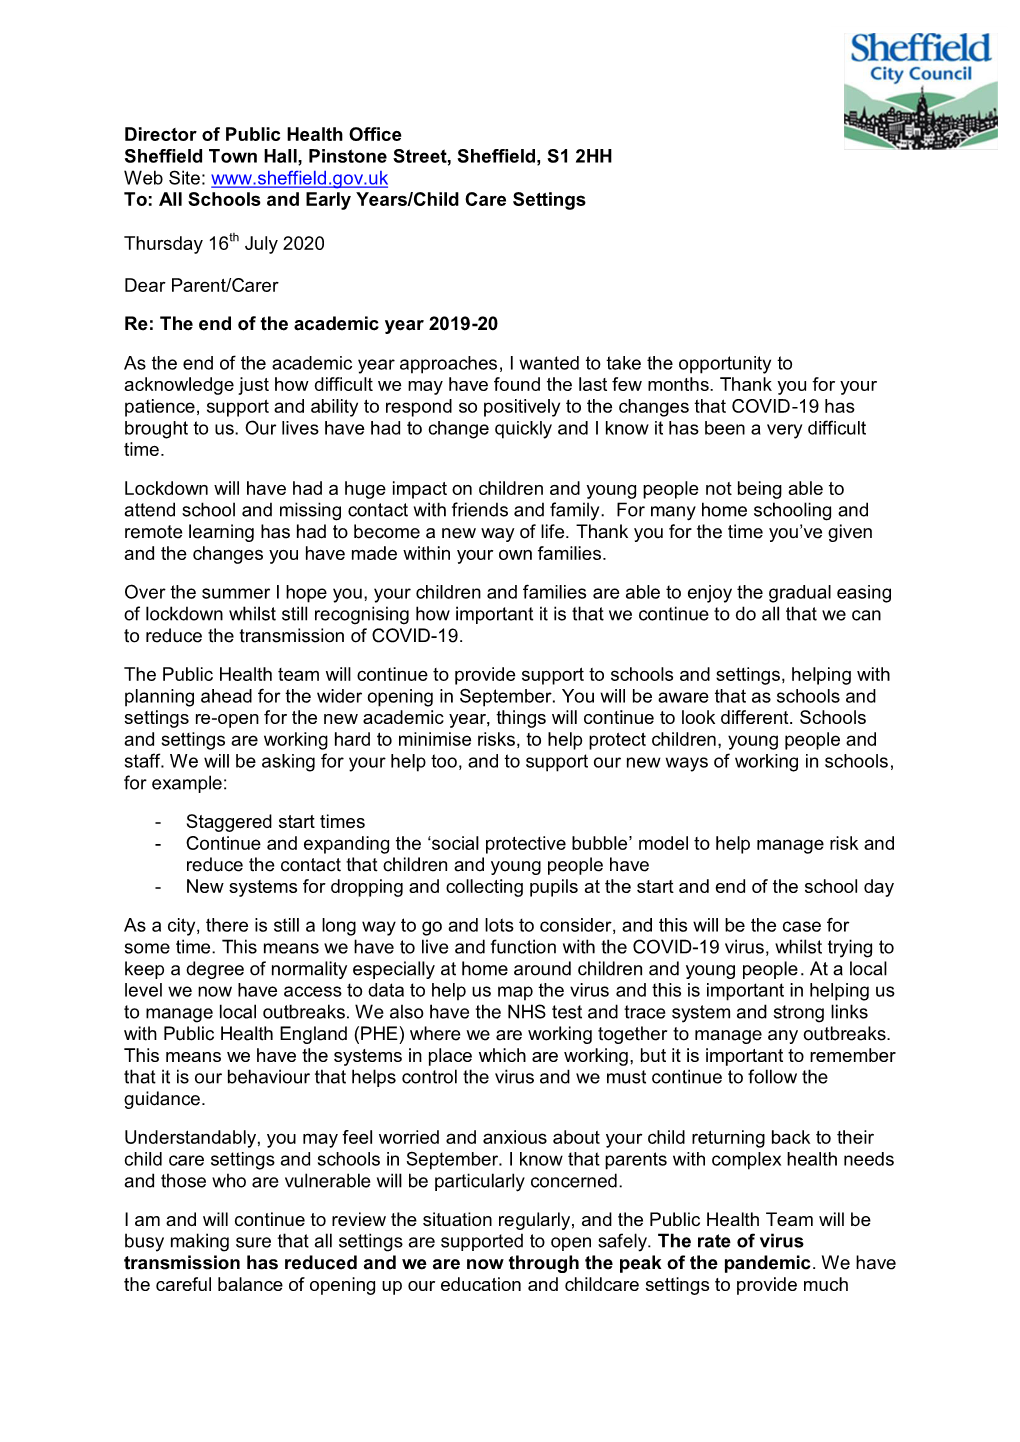 Letter to Parents July 2020 Greg Fell Director of Public Health